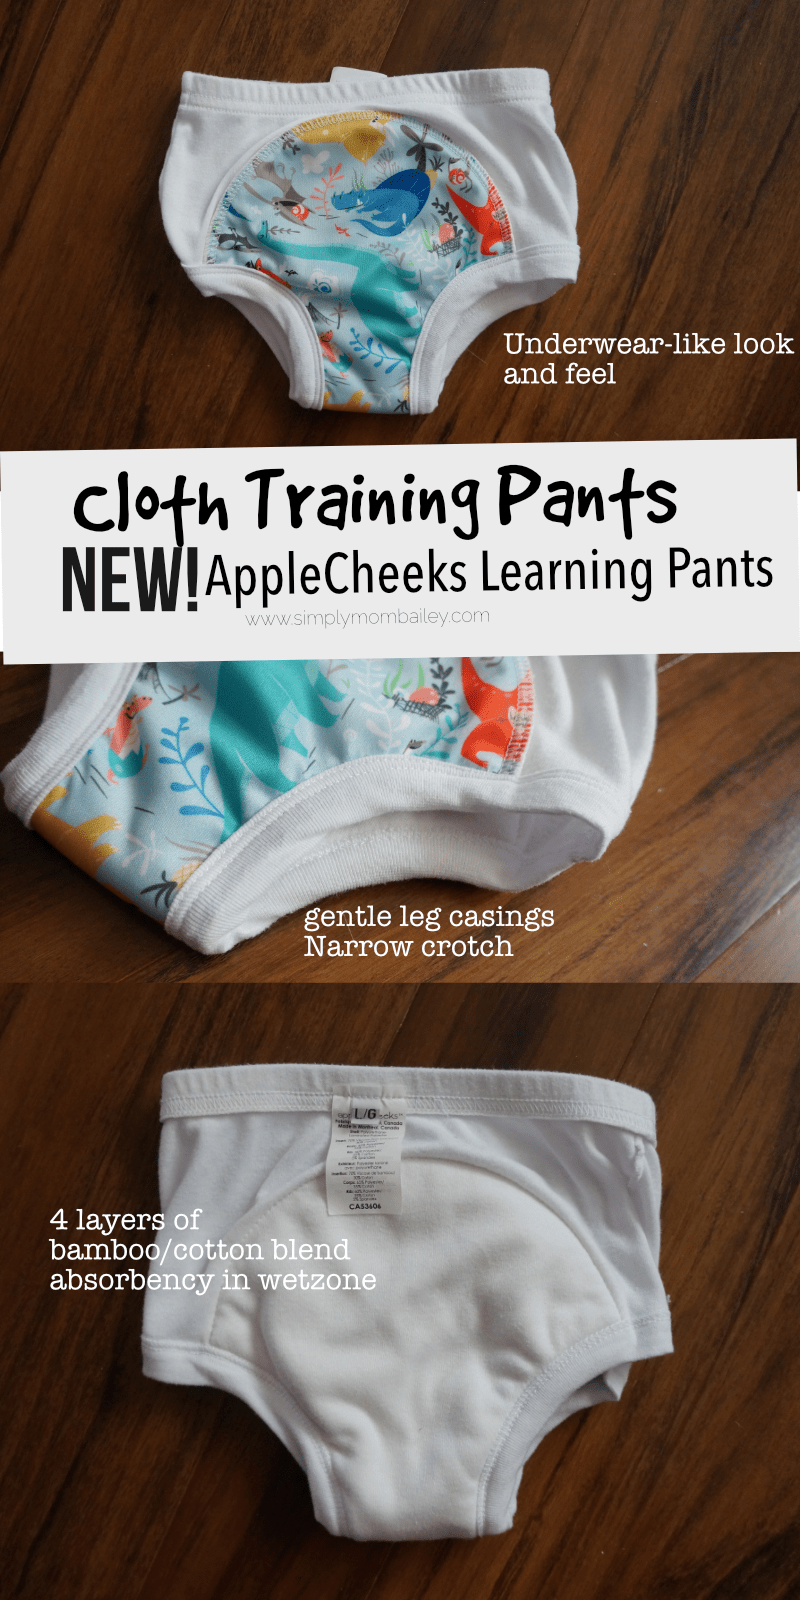 New AppleCheeks Learning Pants for Potty Training Toddlers - Redesigned AppleCheeks - Cloth Trainers - Cloth Underwear - Potty Training - Toilet Training - Pull Ups